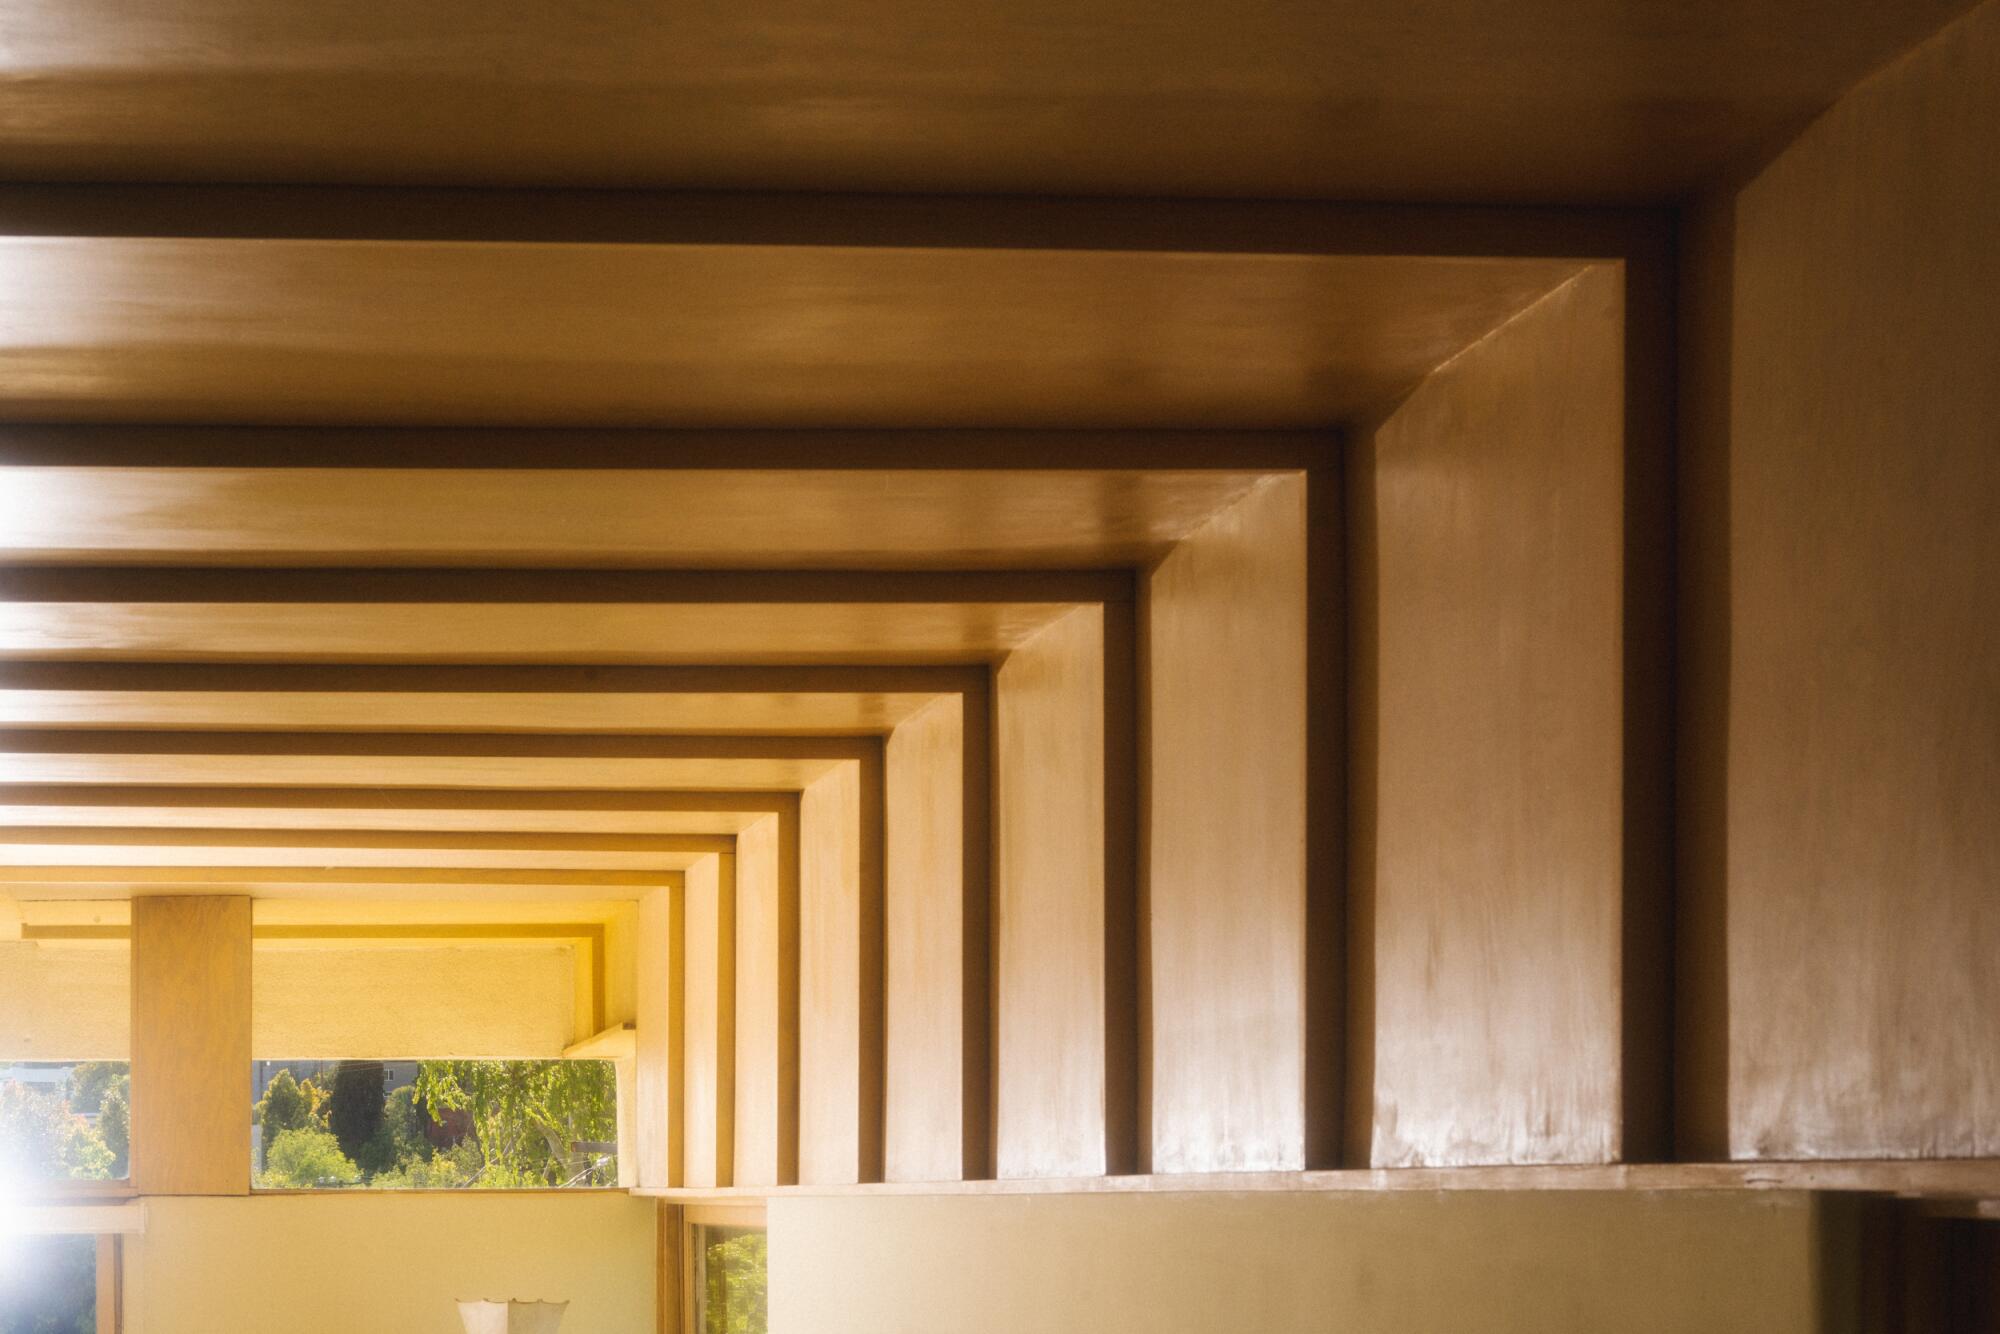 A detail of a warm wooden ceiling that recedes in concentric squares.